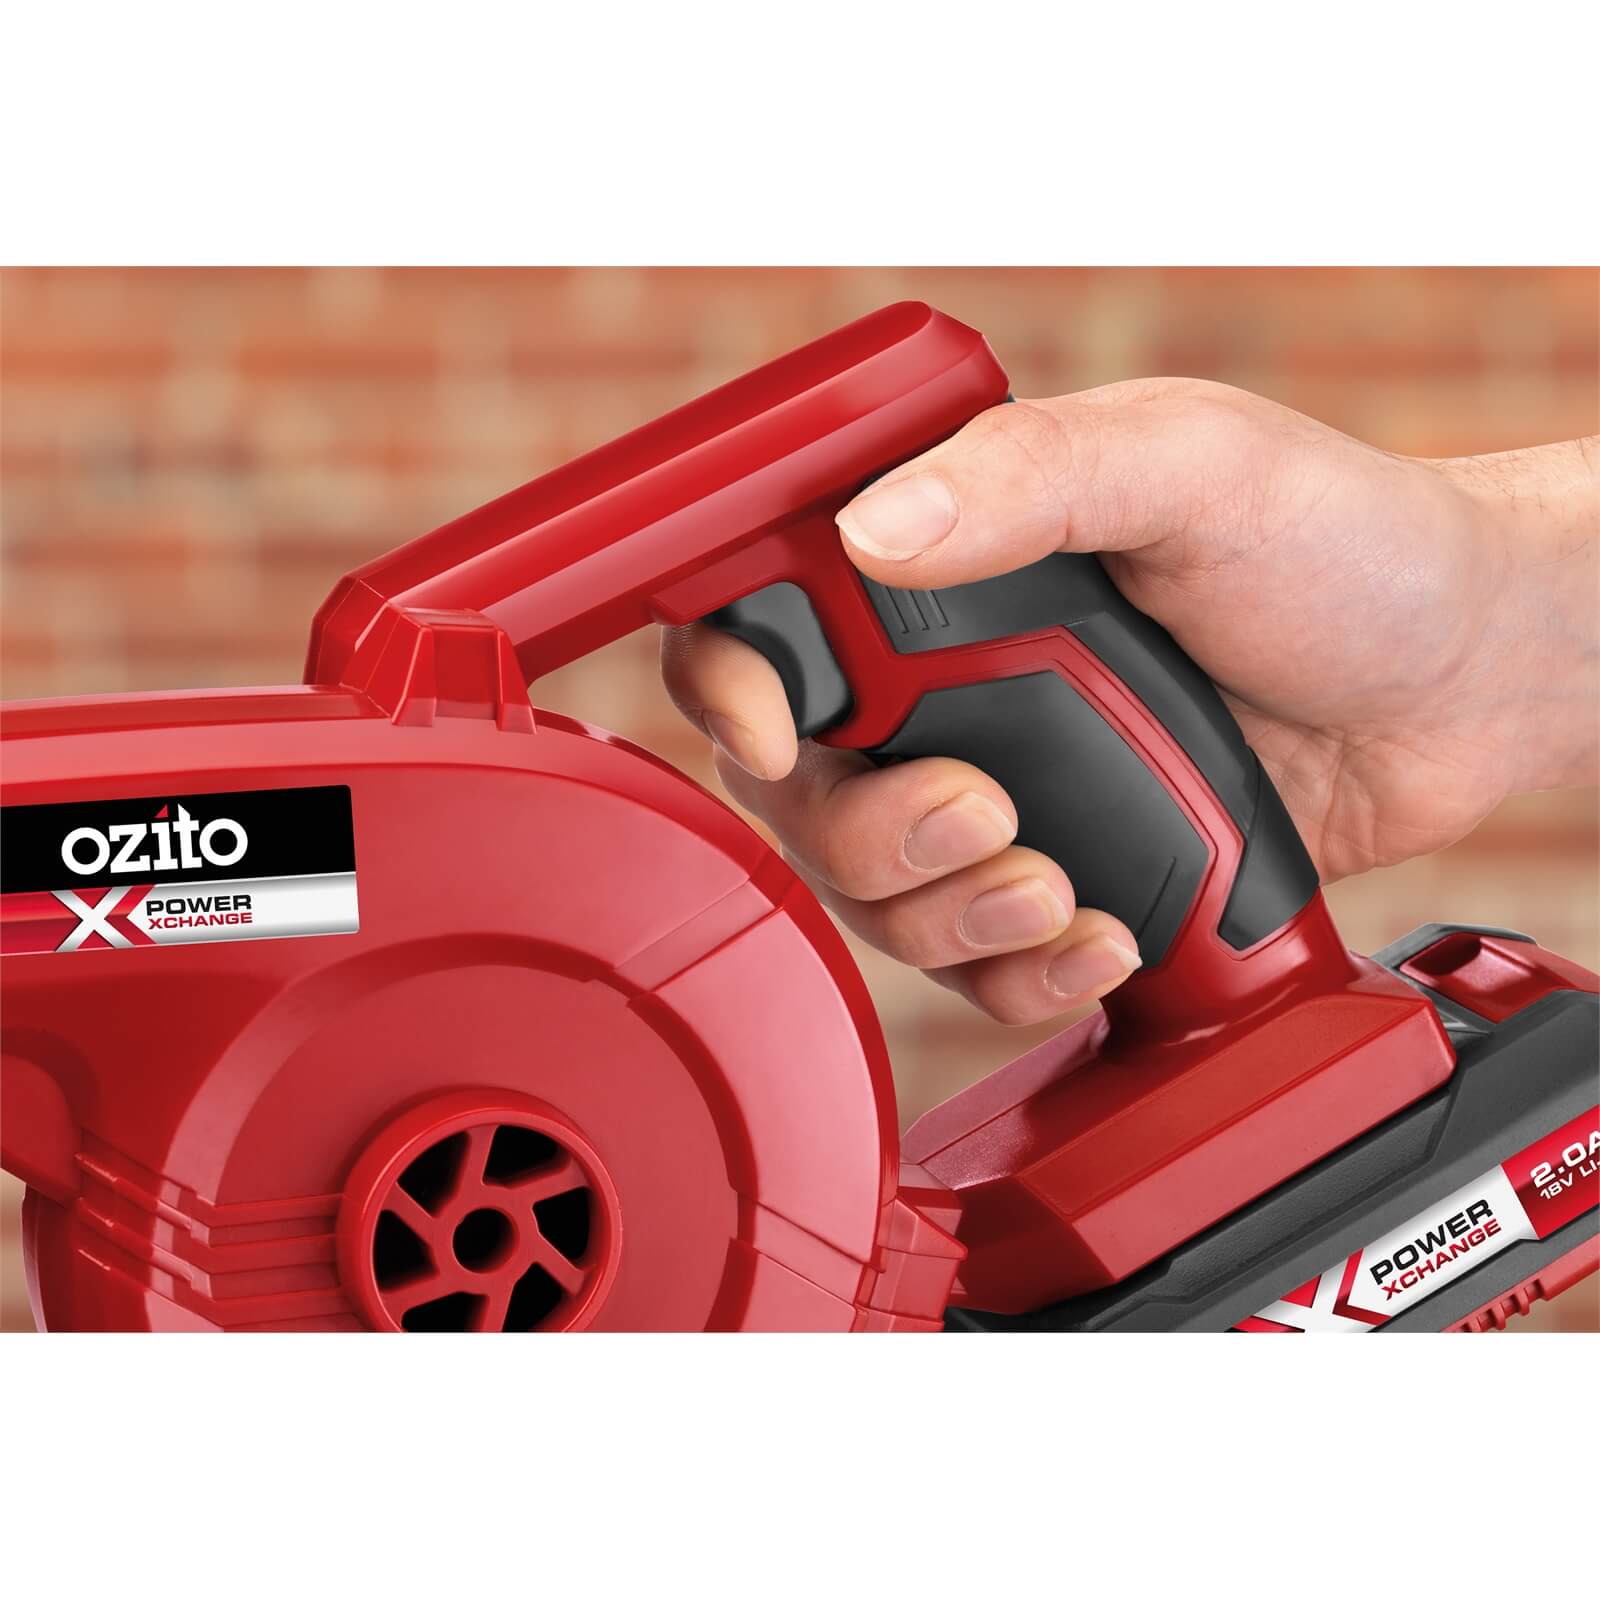 Ozito by Einhell Power X Change 18V Cordless Workshop Blower And Inflator Skin